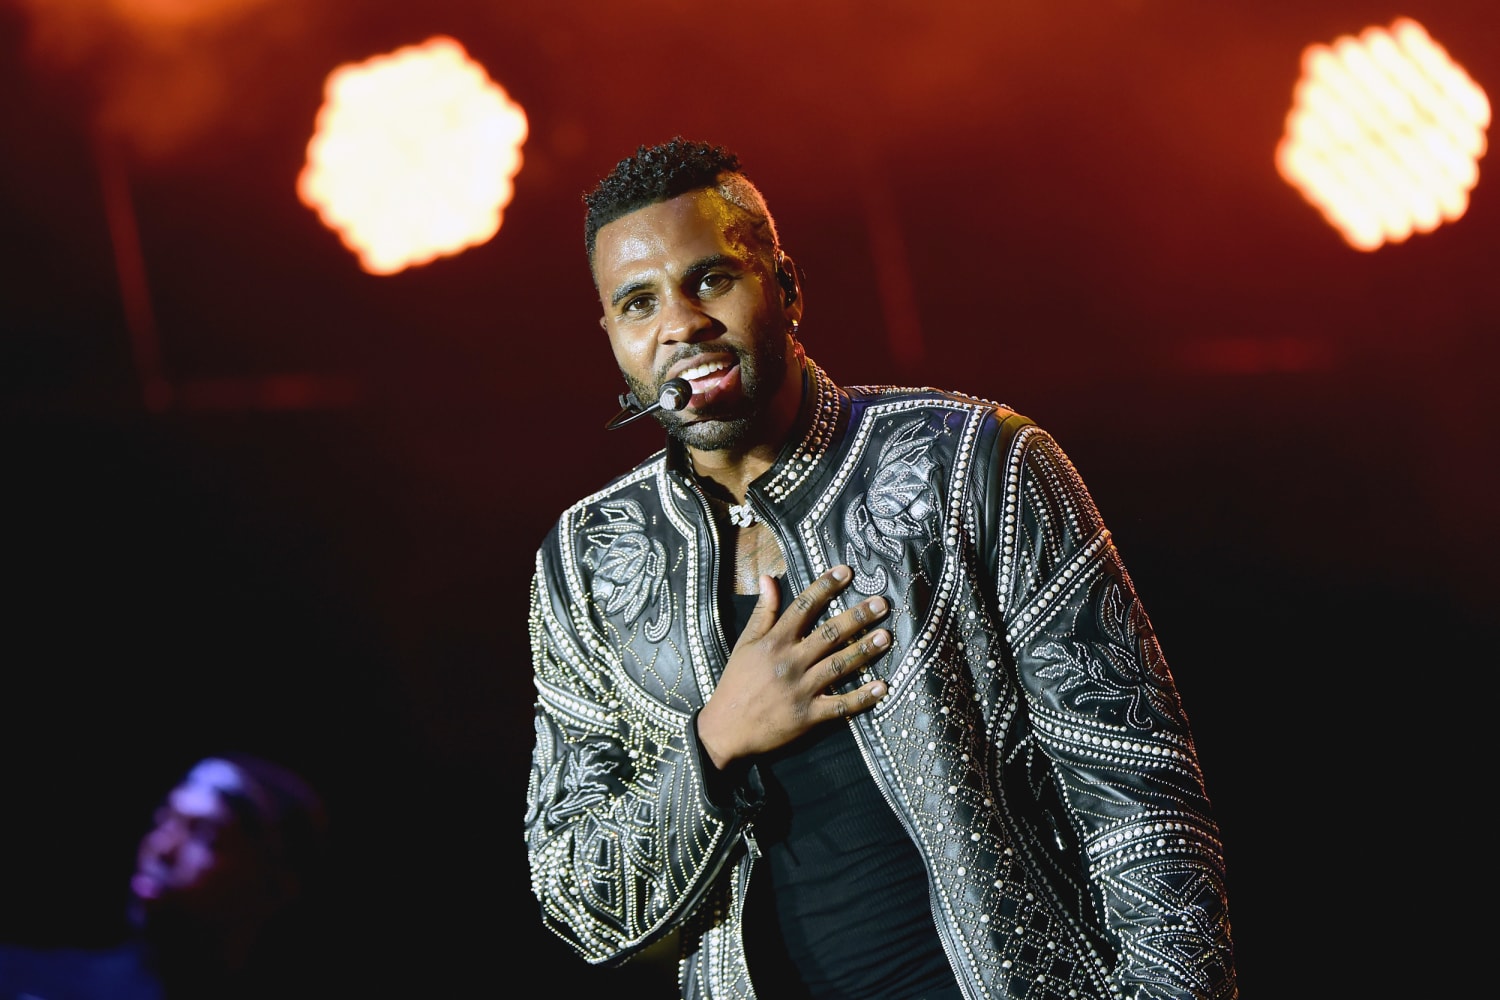 Jason Derulo accused of ‘battery’ after being called Usher at Vegas club